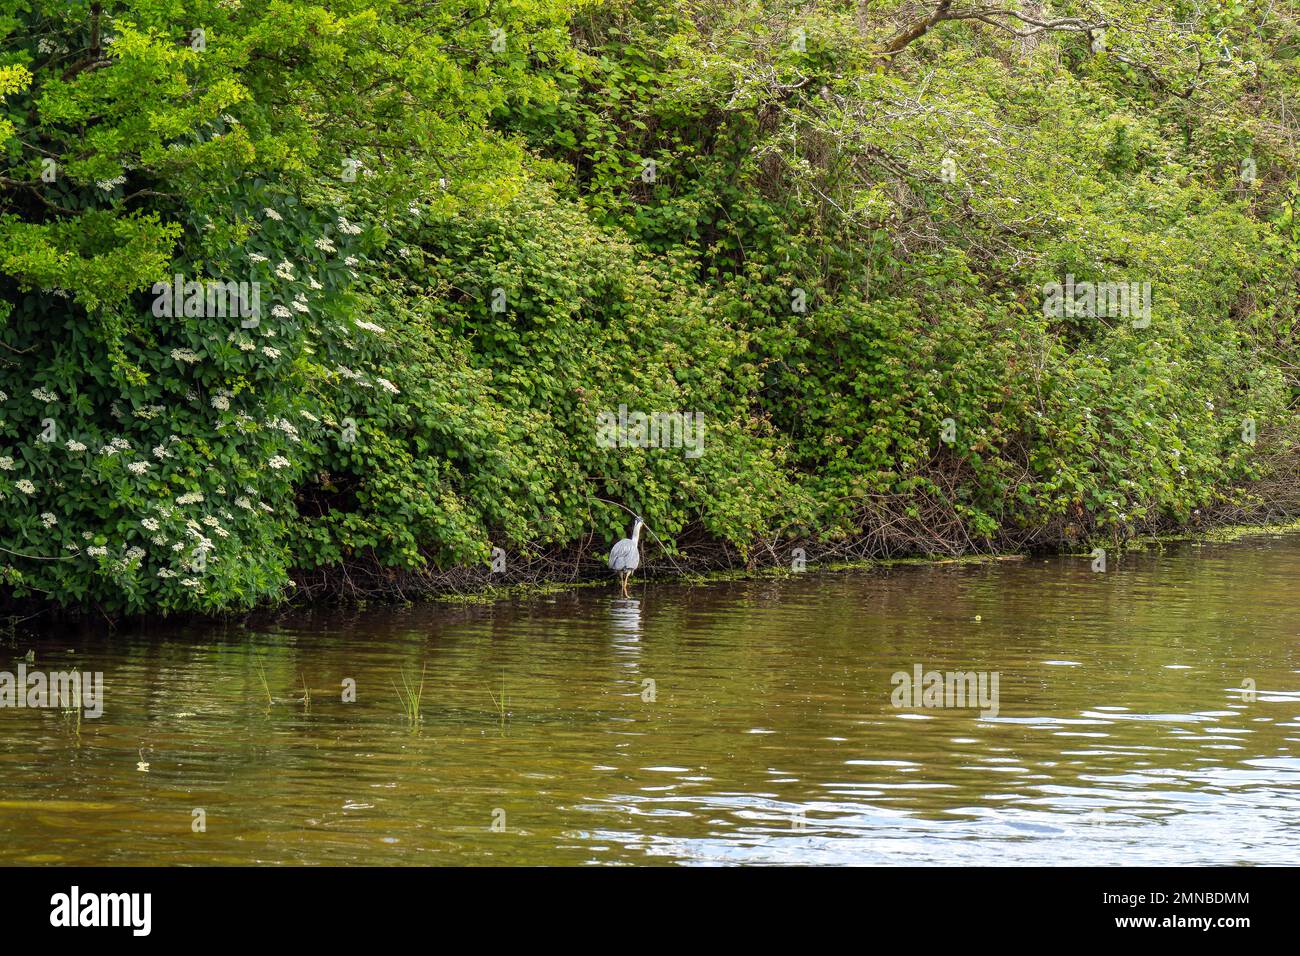 Swampy terrain and bird. The shores of the lake are overgrown with vegetation. Wildlife, landscape. A white bird on the water. Stock Photo